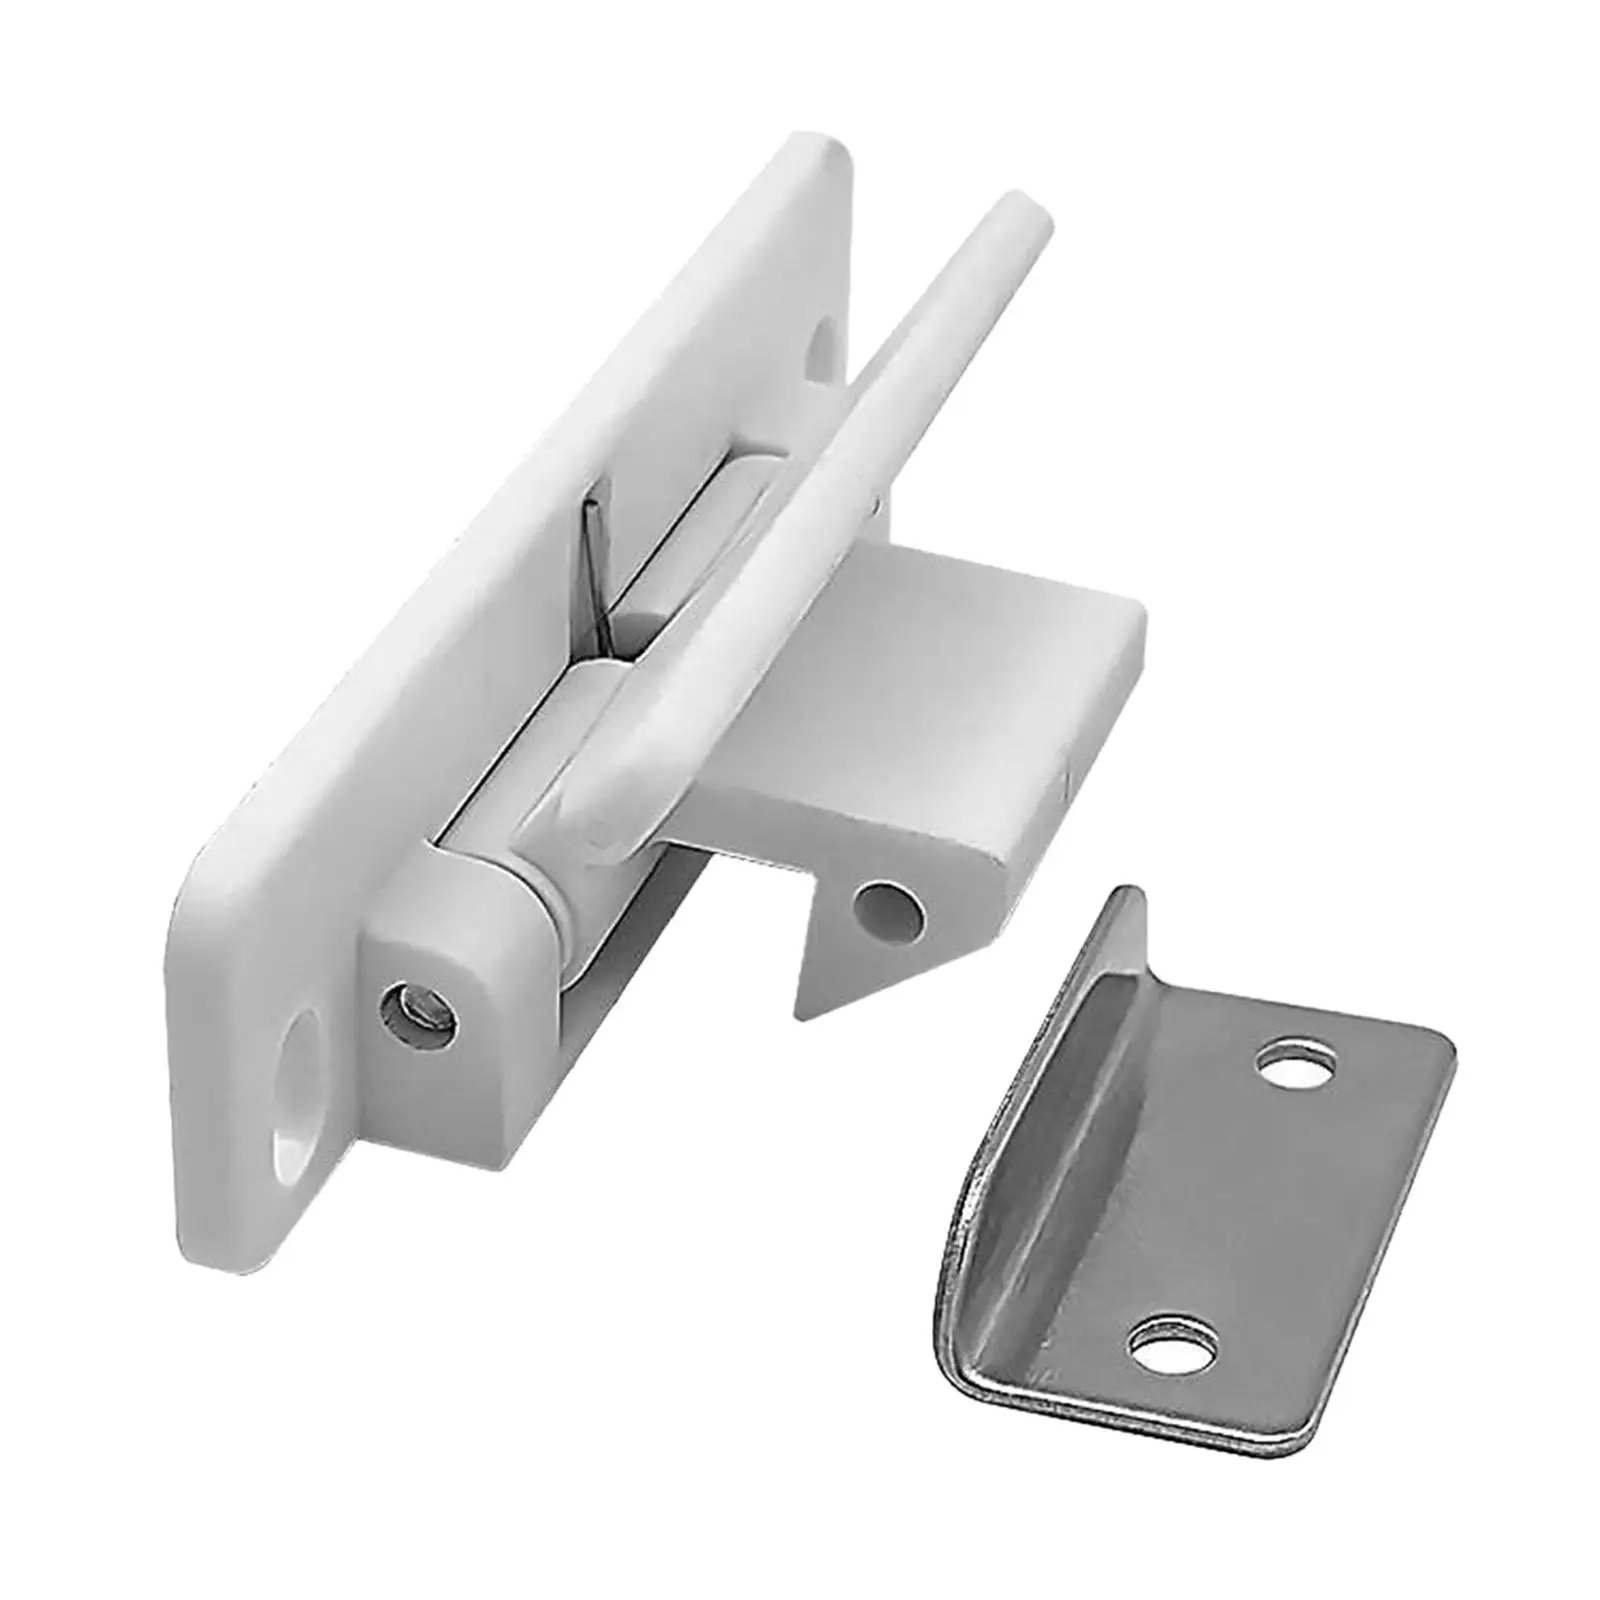 RV Cabinet latches Furniture Hardware Accessories Closet Door Catch Latch for Wardrobe Bathroom Cupboard Office Drawers durable